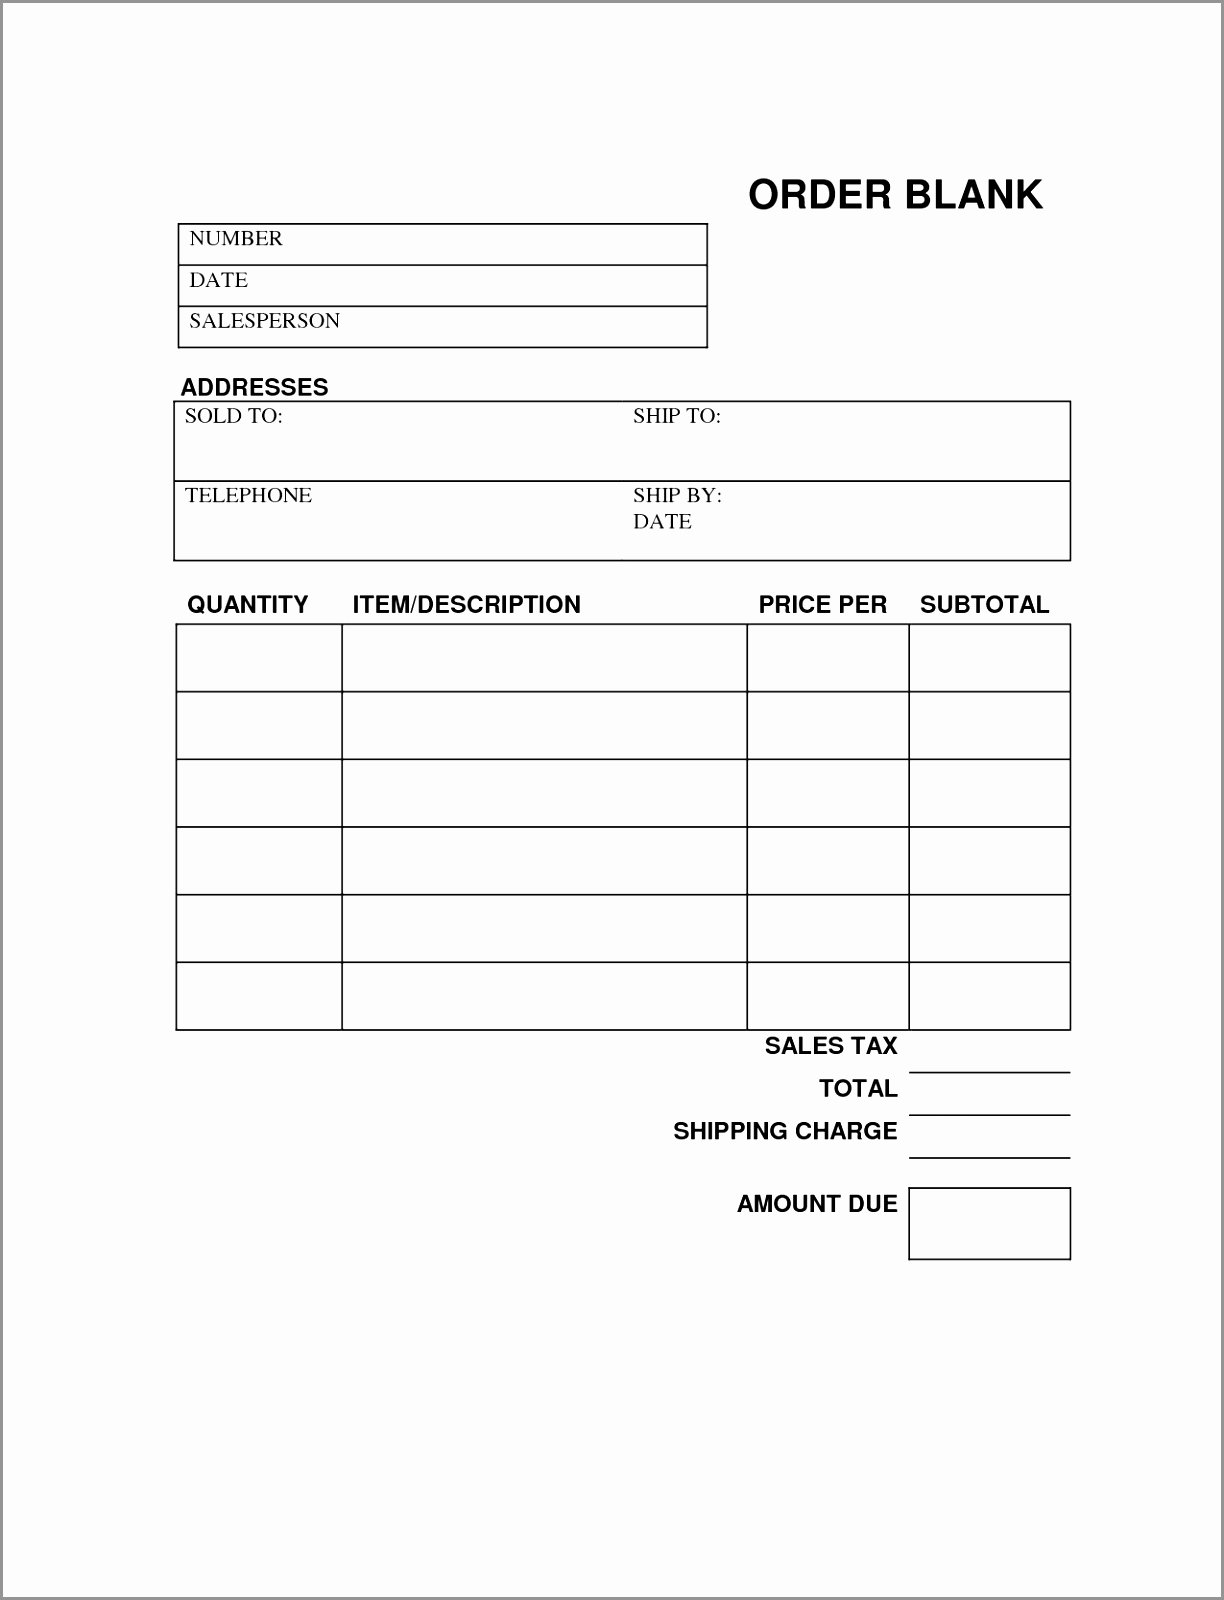 12 Member Application form Template Yiwpe